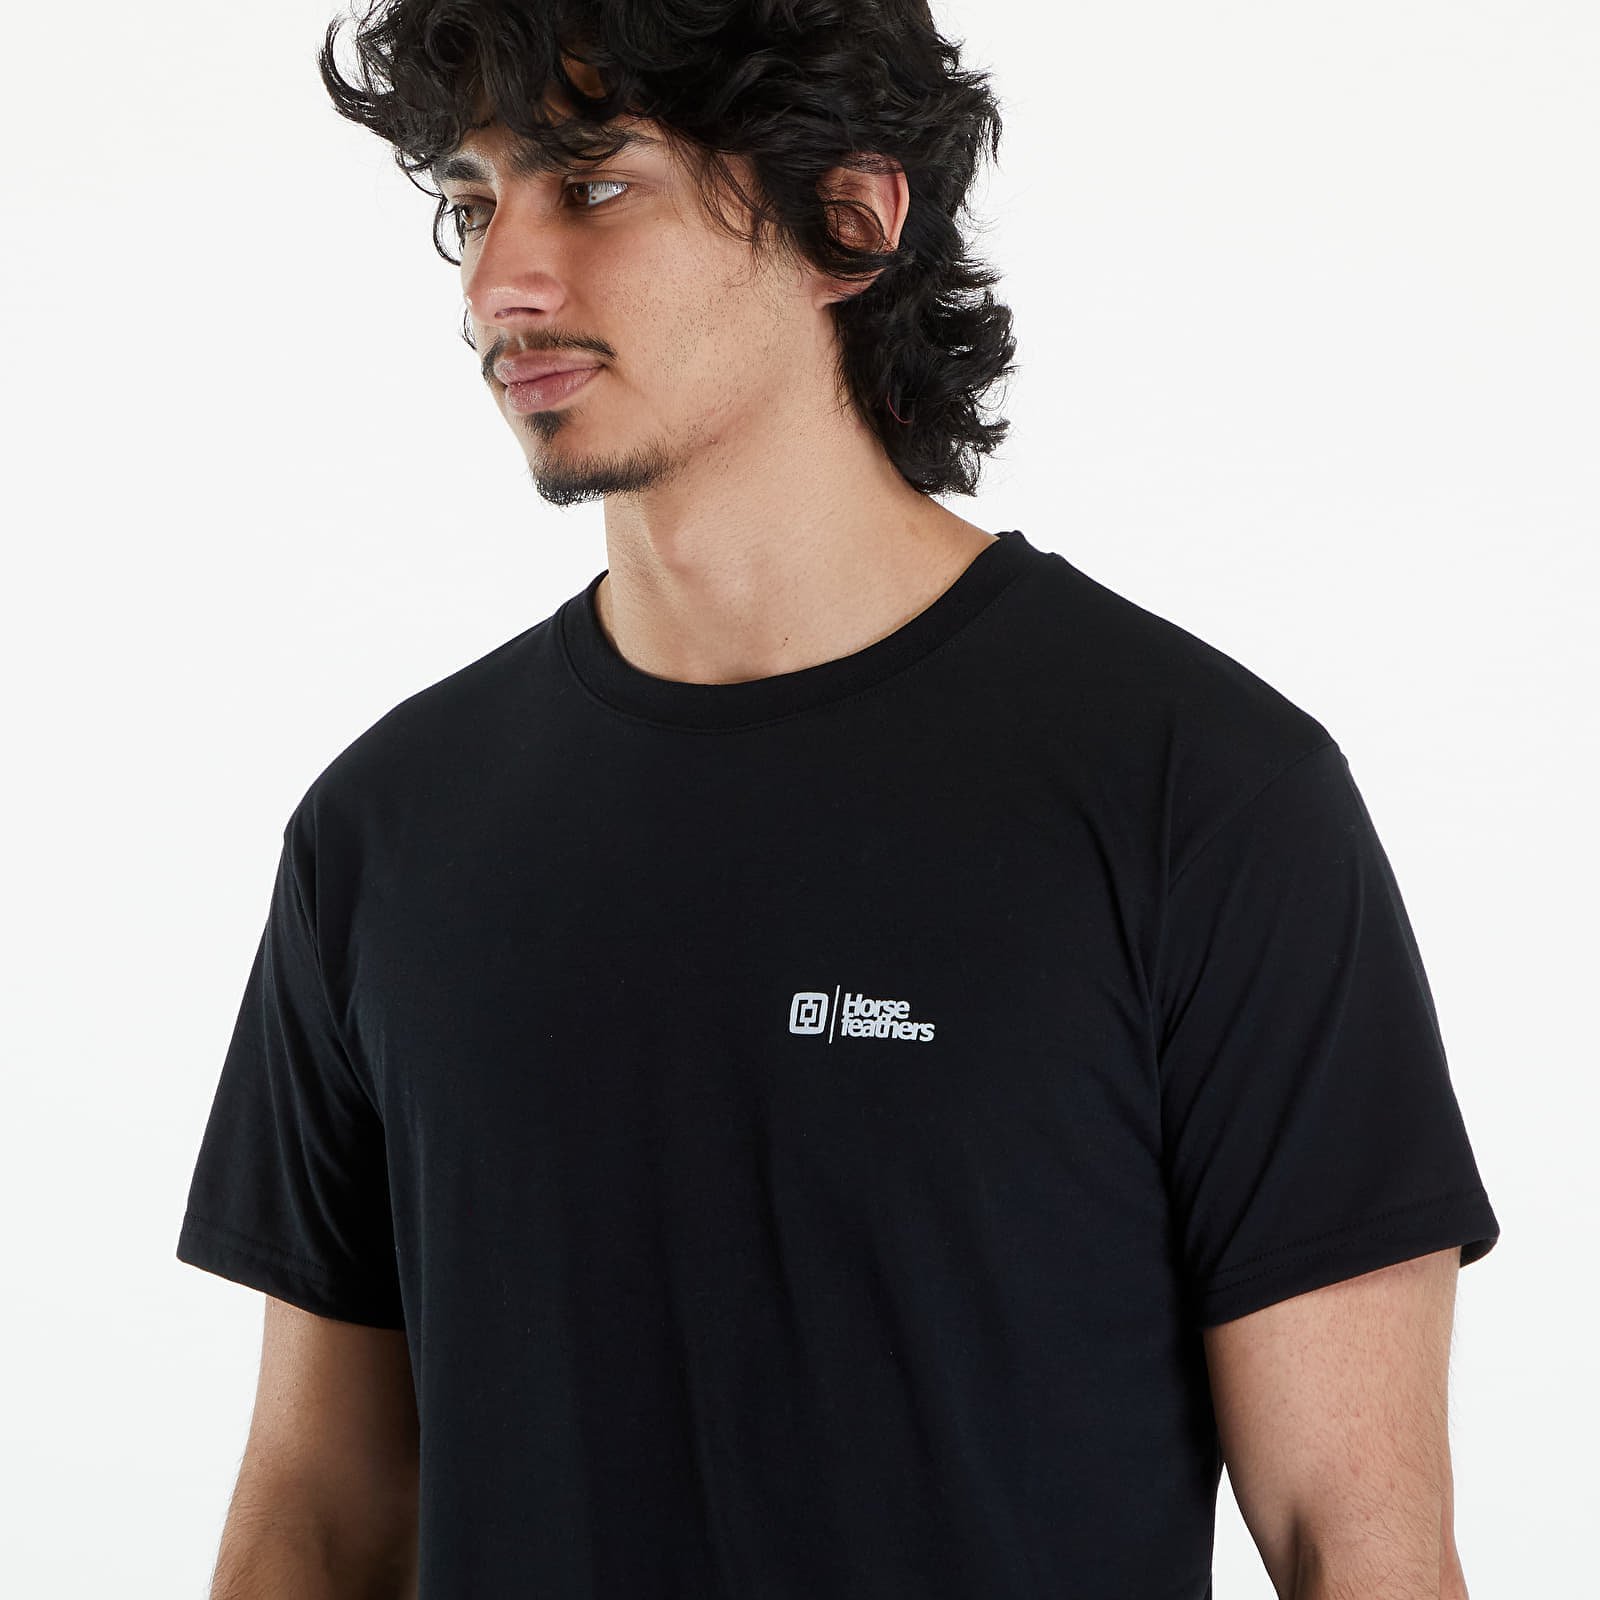 Rooter T-Shirt Black